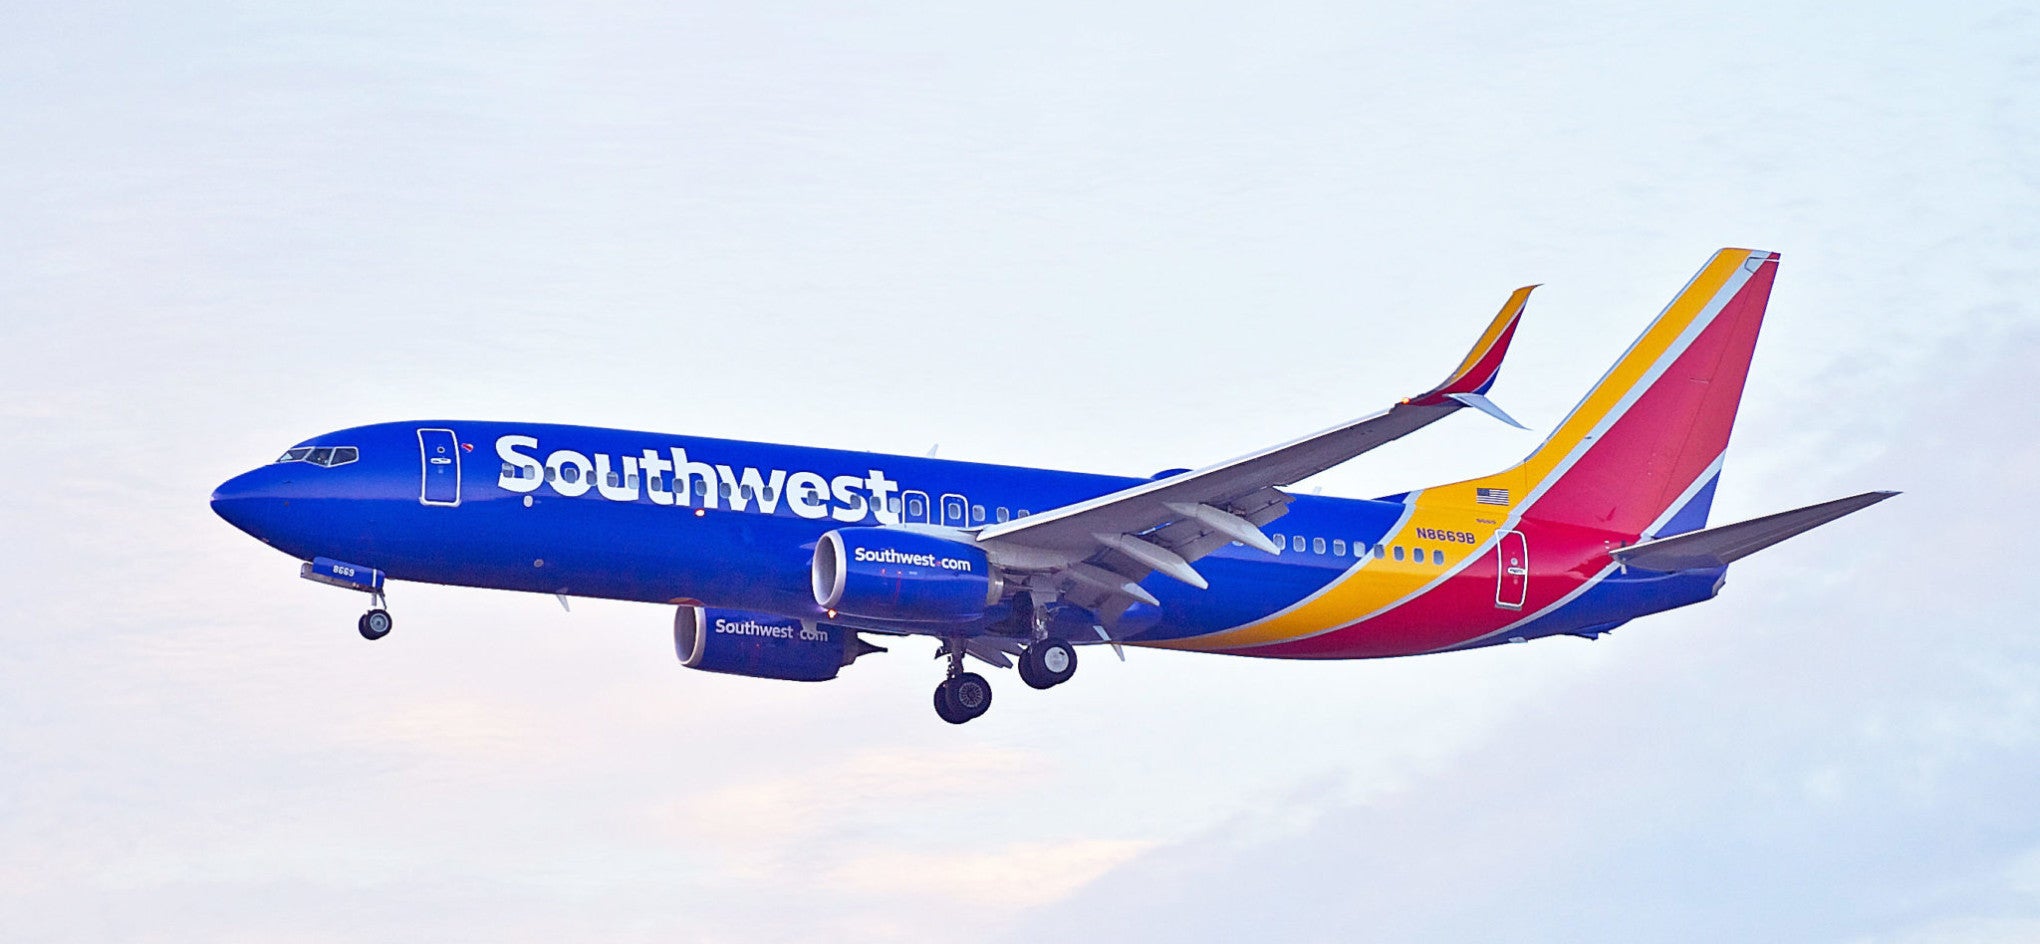 Southwest Airlines Review Amenities, Fees, Seats, Service [2022]